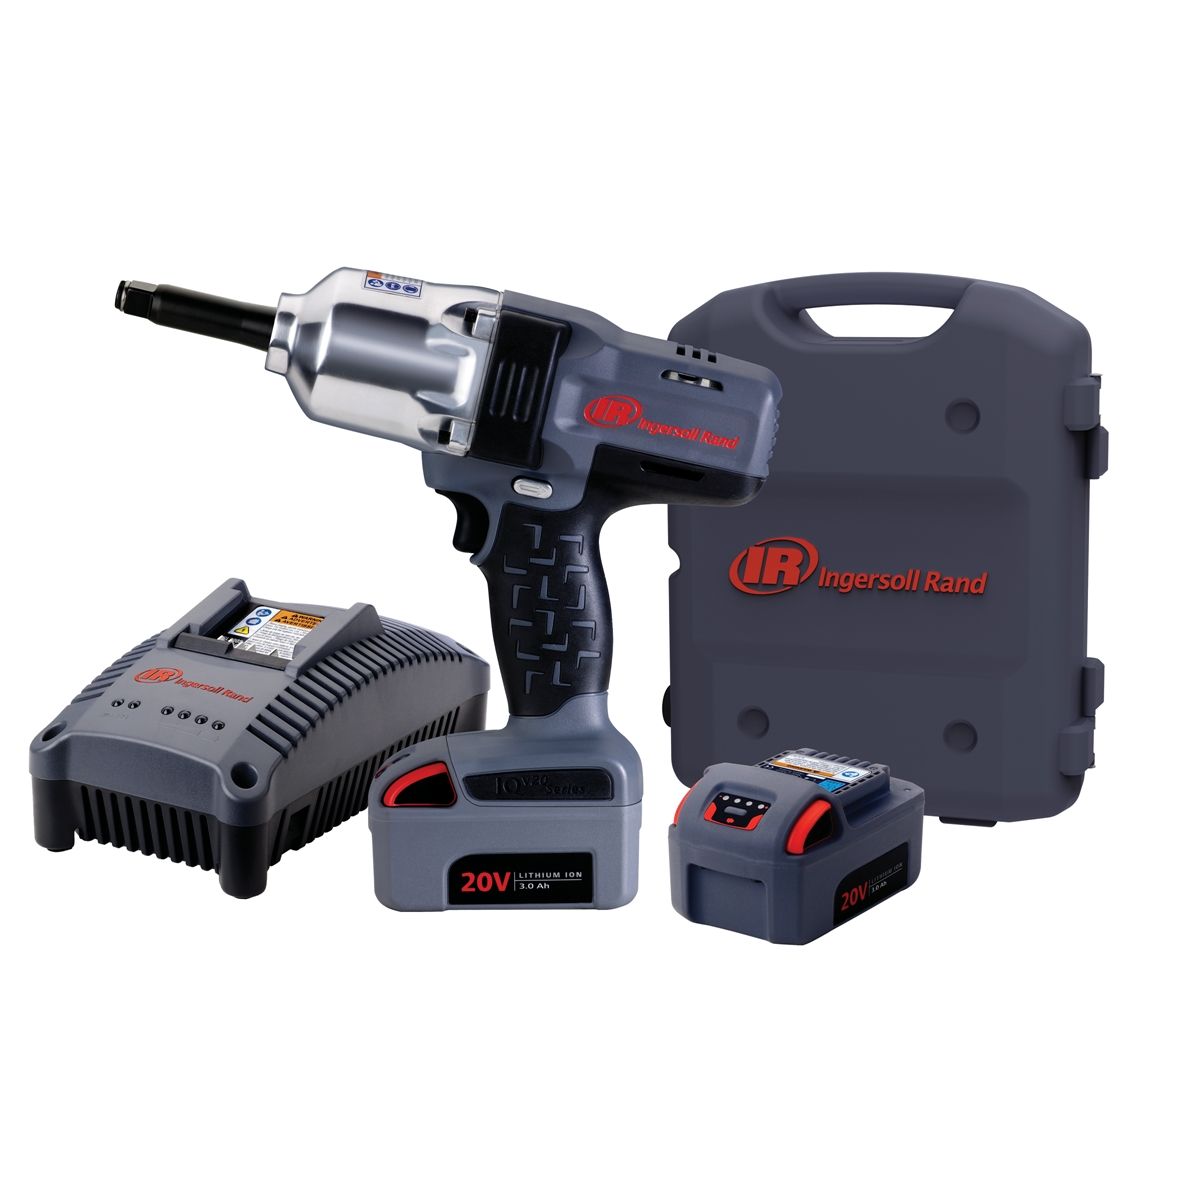 1/2 Inch Drive Cordless 20V Impactool w 2 Inch Anvil, 2 Batterie